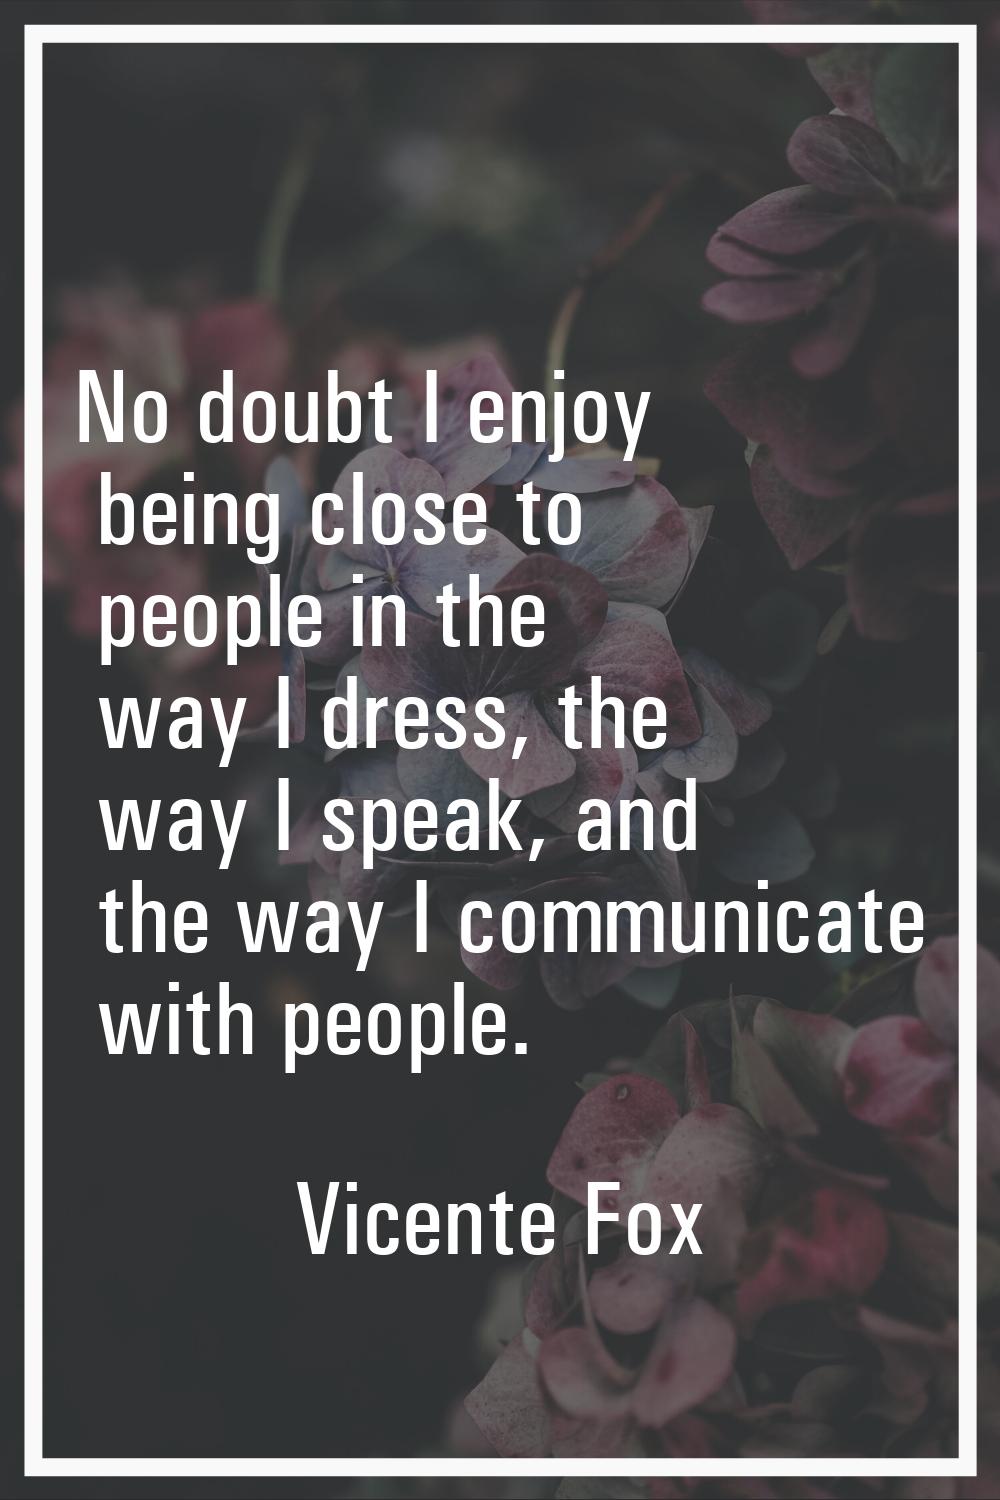 No doubt I enjoy being close to people in the way I dress, the way I speak, and the way I communica